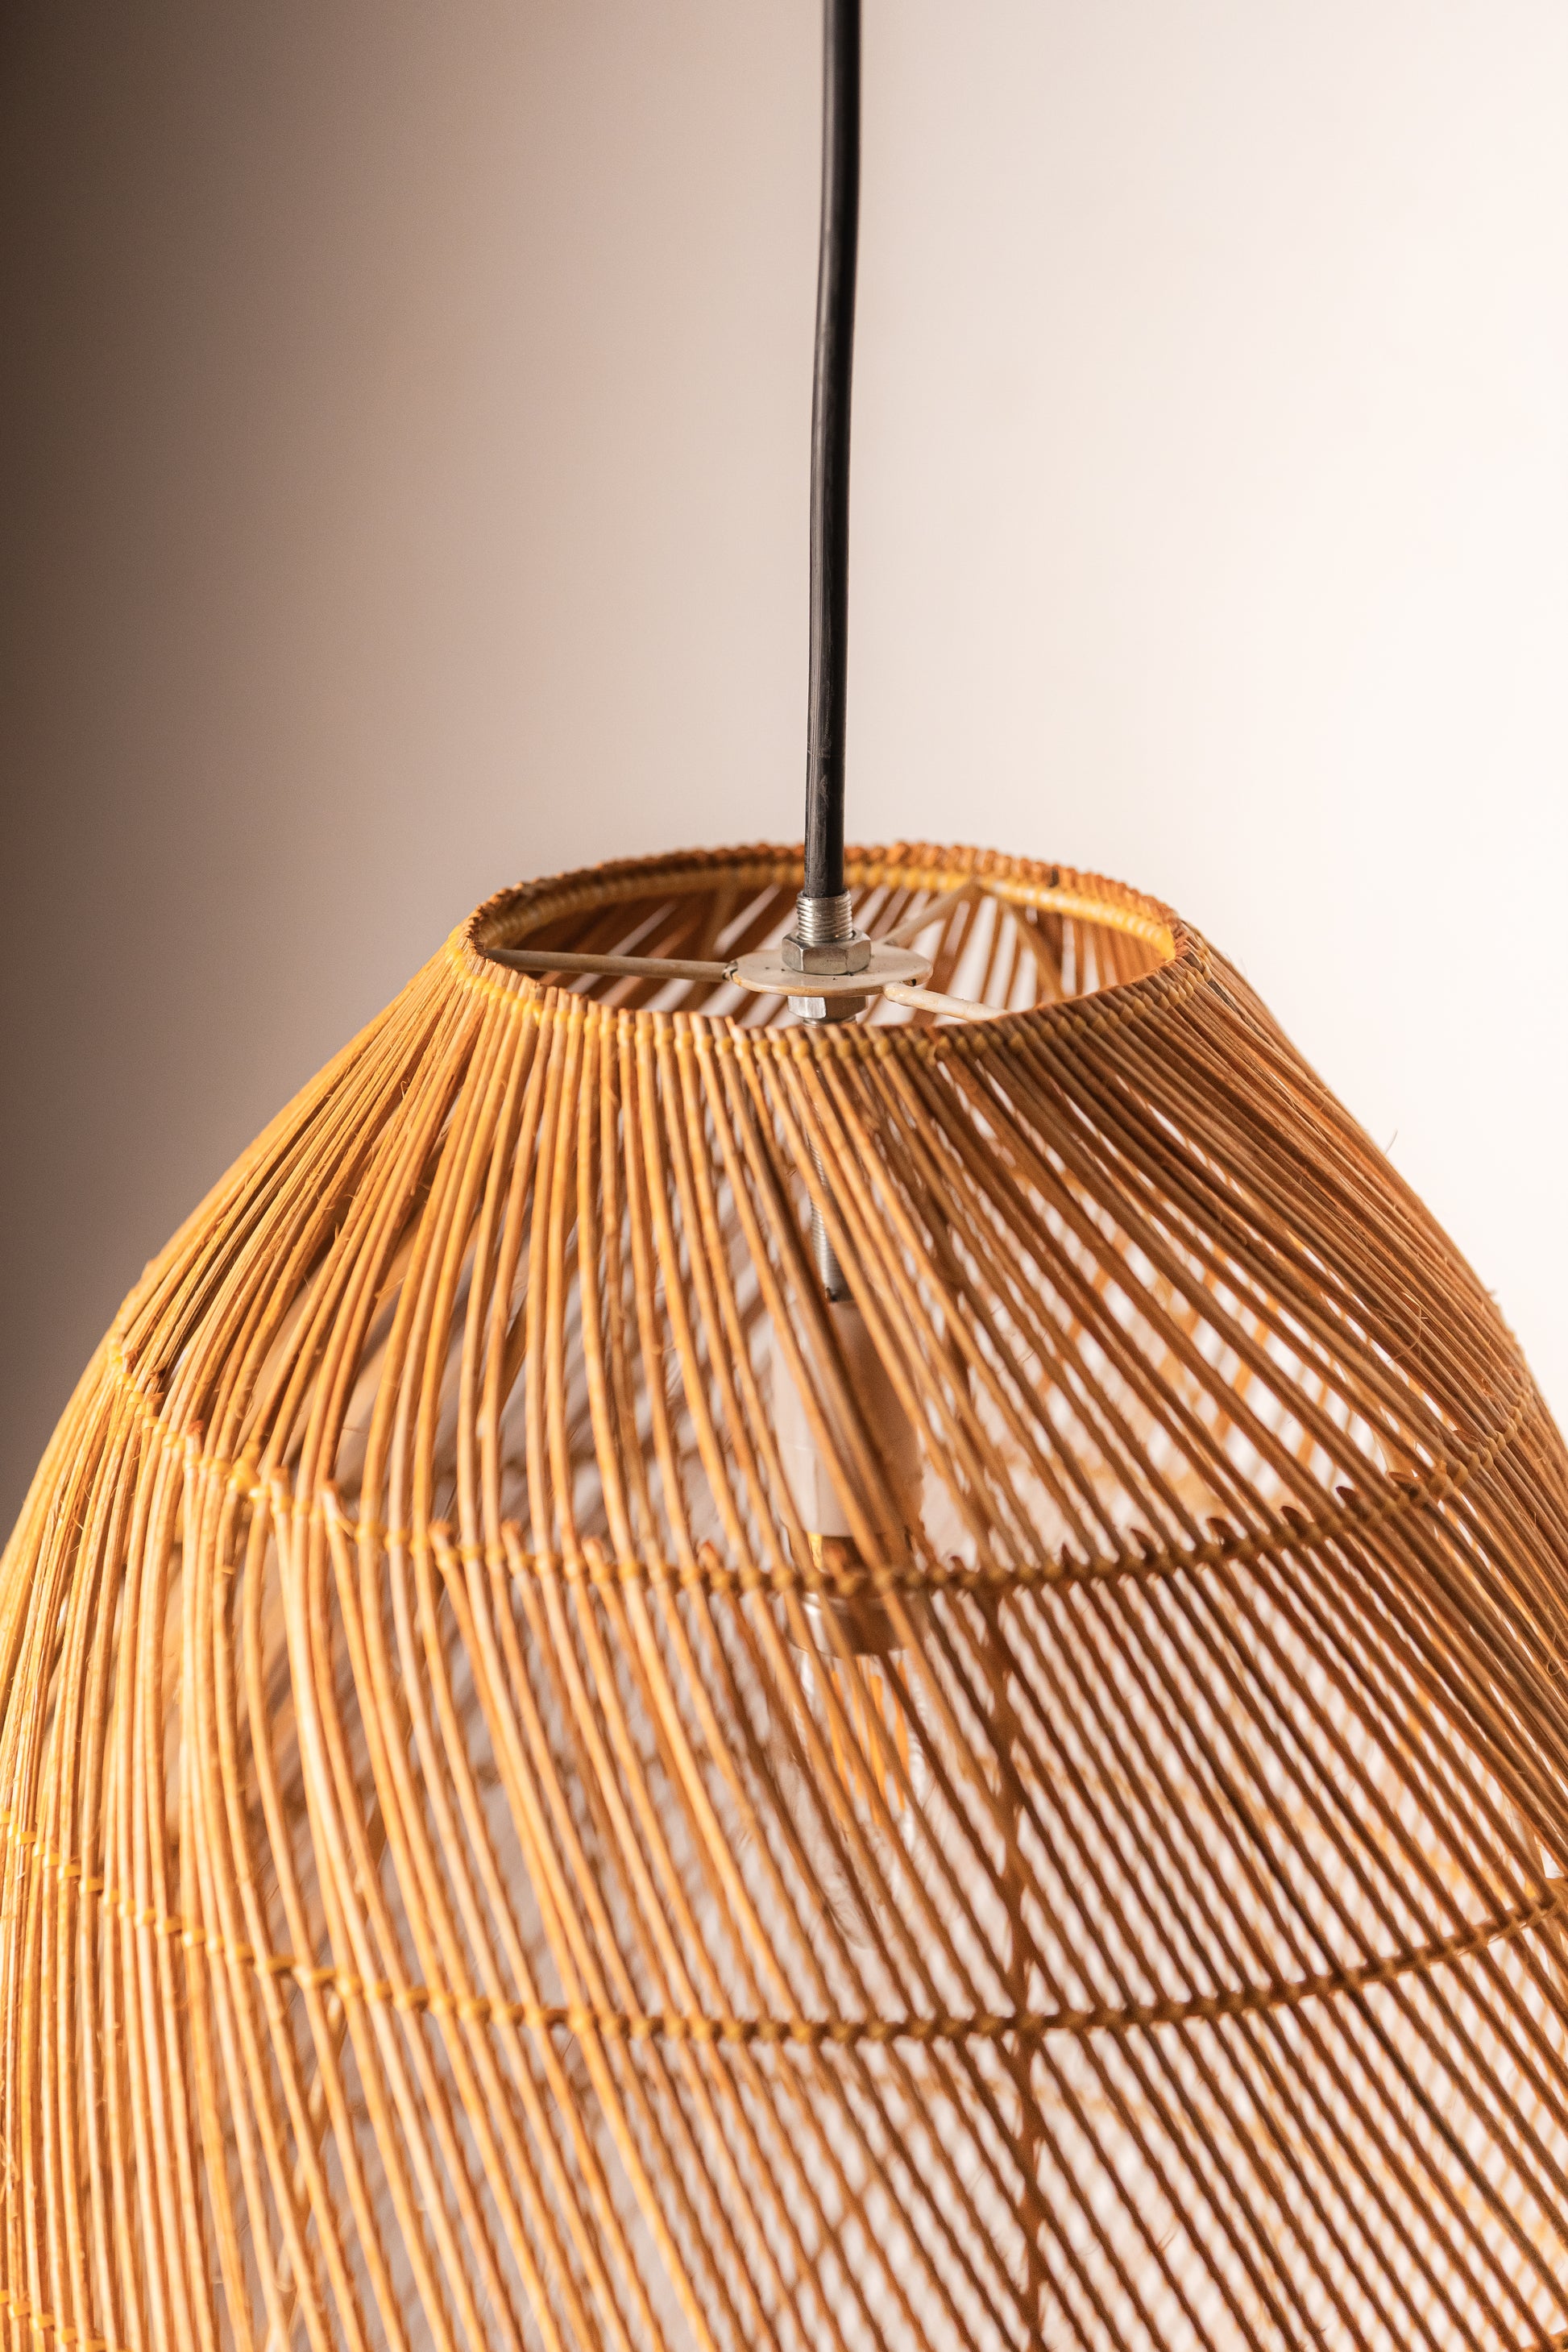 Rattan Pendant Drop Shaped Lampshade. A beautifully handcrafted rattan pendant that looks amazing in a bedroom, child's room, living space or covered patio . It is expertly crafted and hand finished to perfection ensuring quality. This rattan pendant light is a great way to add bohemian charm and warmth to your home and is perfectly adaptable to any ceiling height from your bedroom TESU